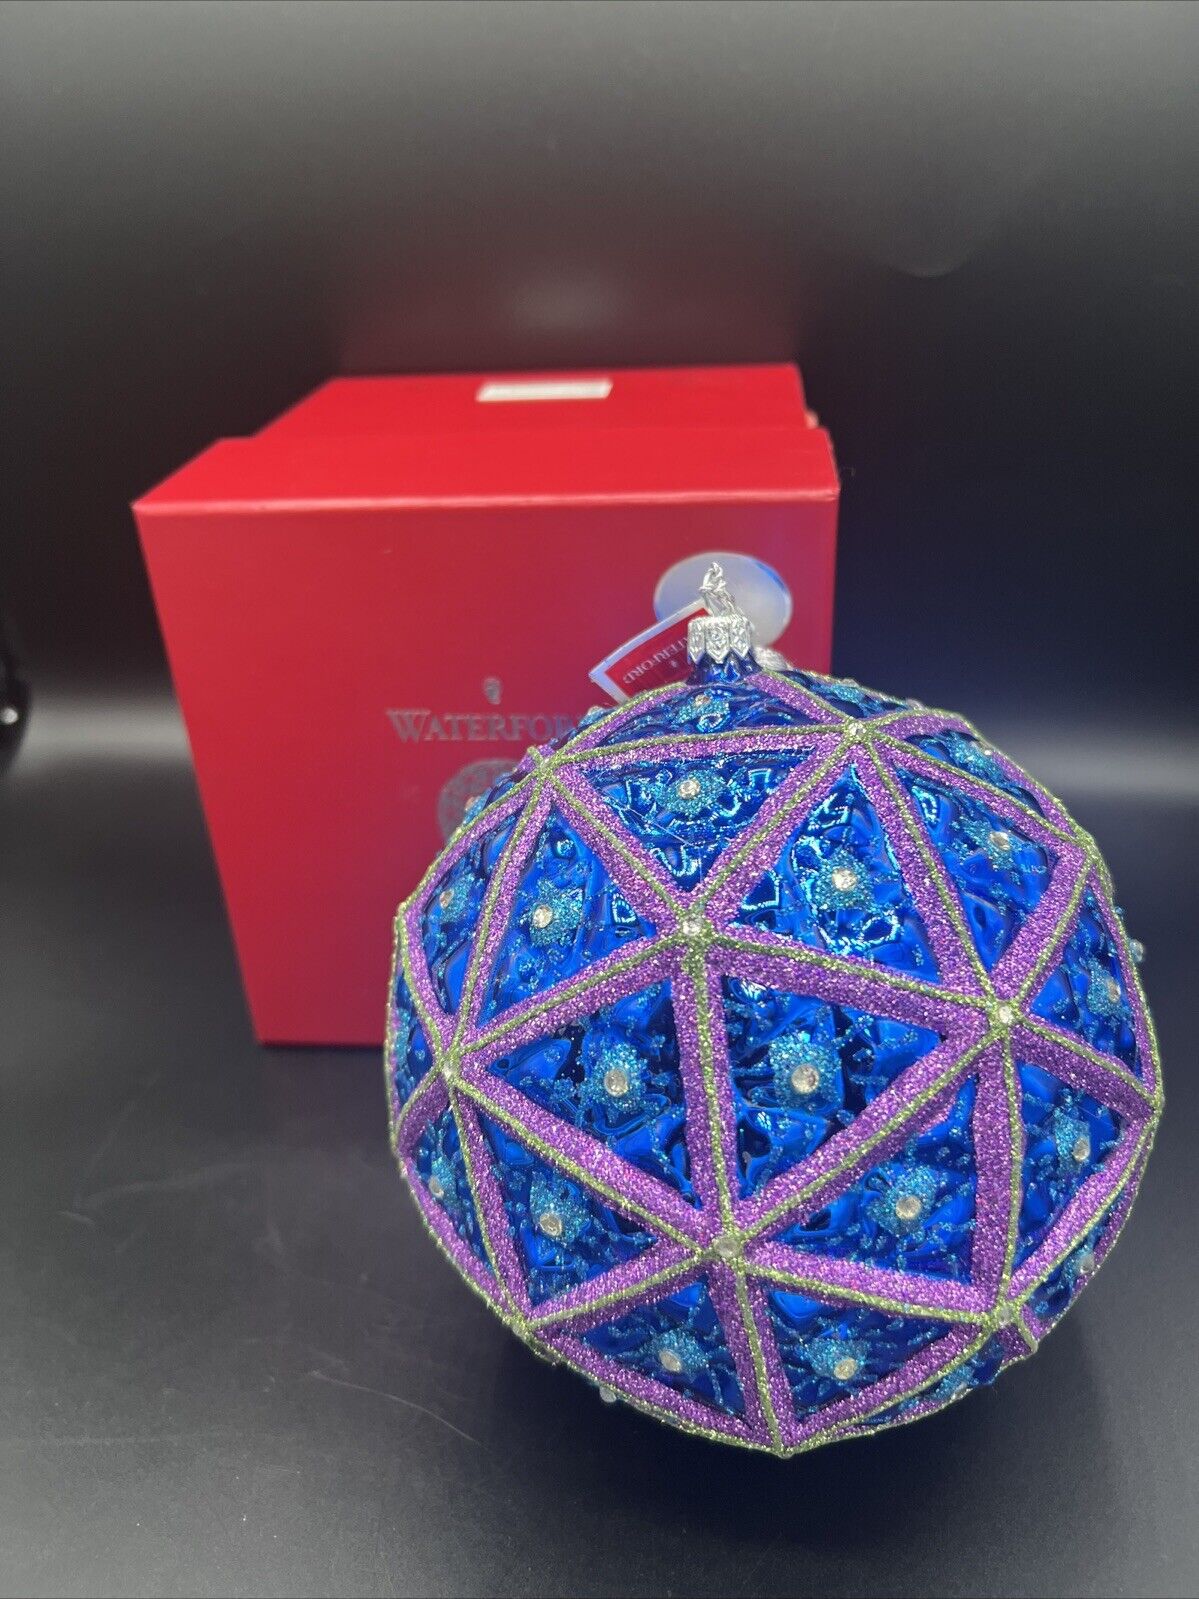 Waterford Times Square Masterpiece Ball 2017 Gift Of Kindness 6” Blown Glass